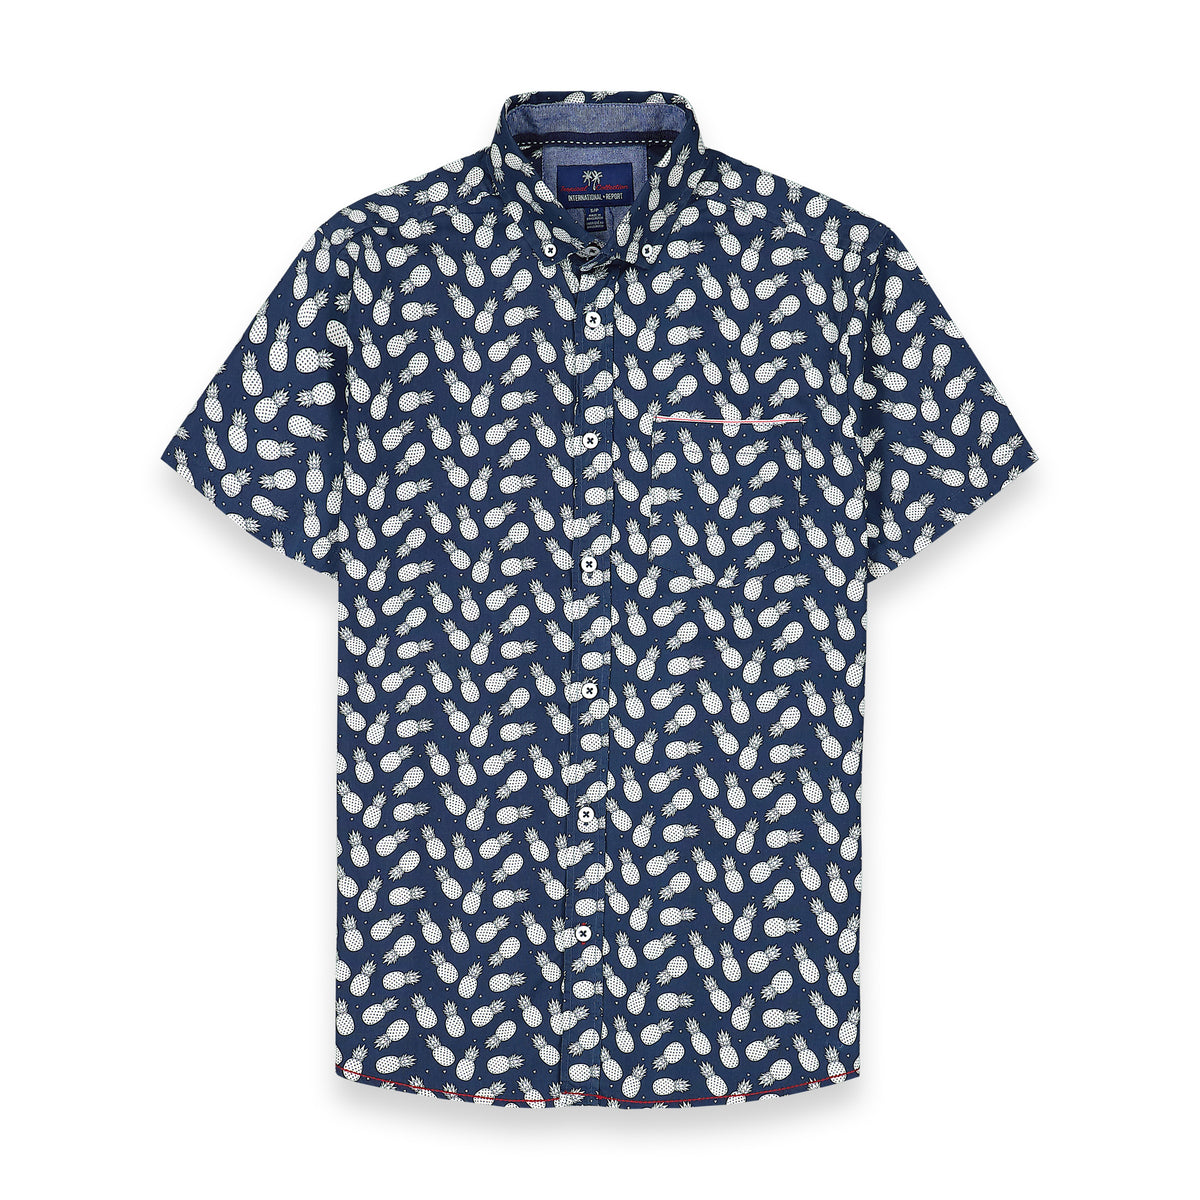 Front View of Short Sleeve Shirt with Pineapple Print in Navy